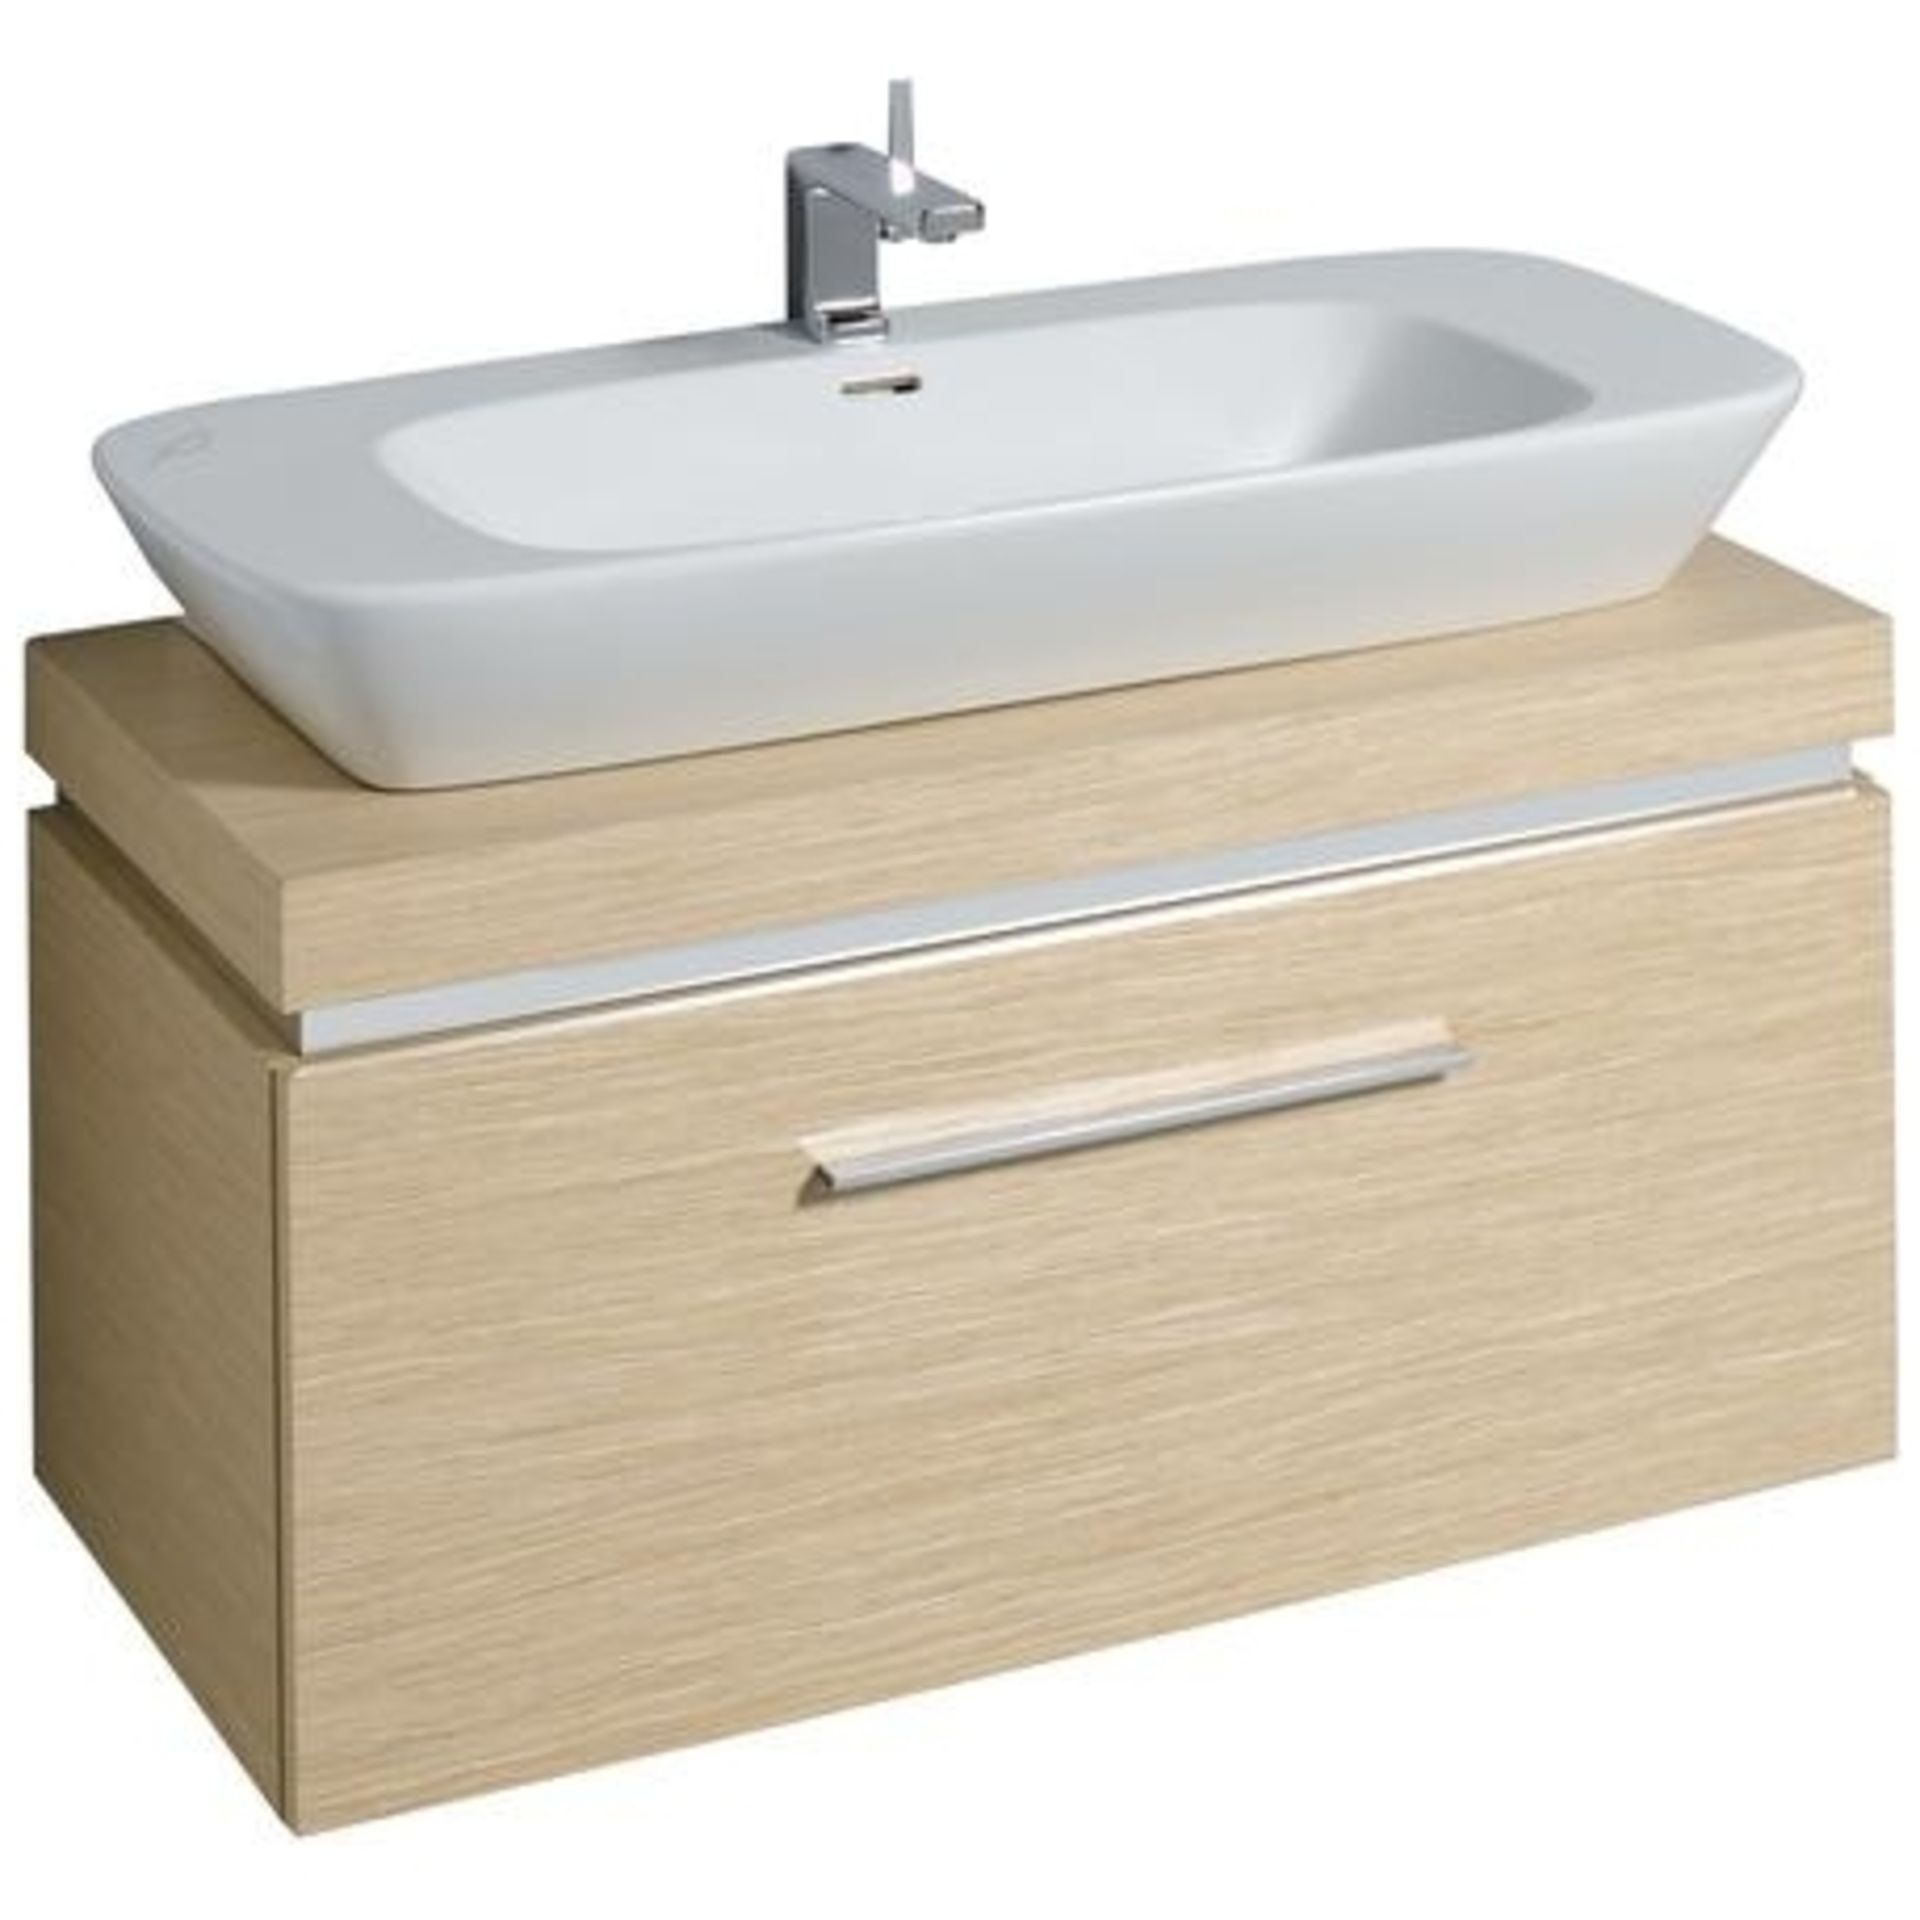 (PC7) 1000mm Keramag Silk Wall Hung Oak Basin Unit. RRP £981.99. .Comes complete with basin. ...( - Image 2 of 3